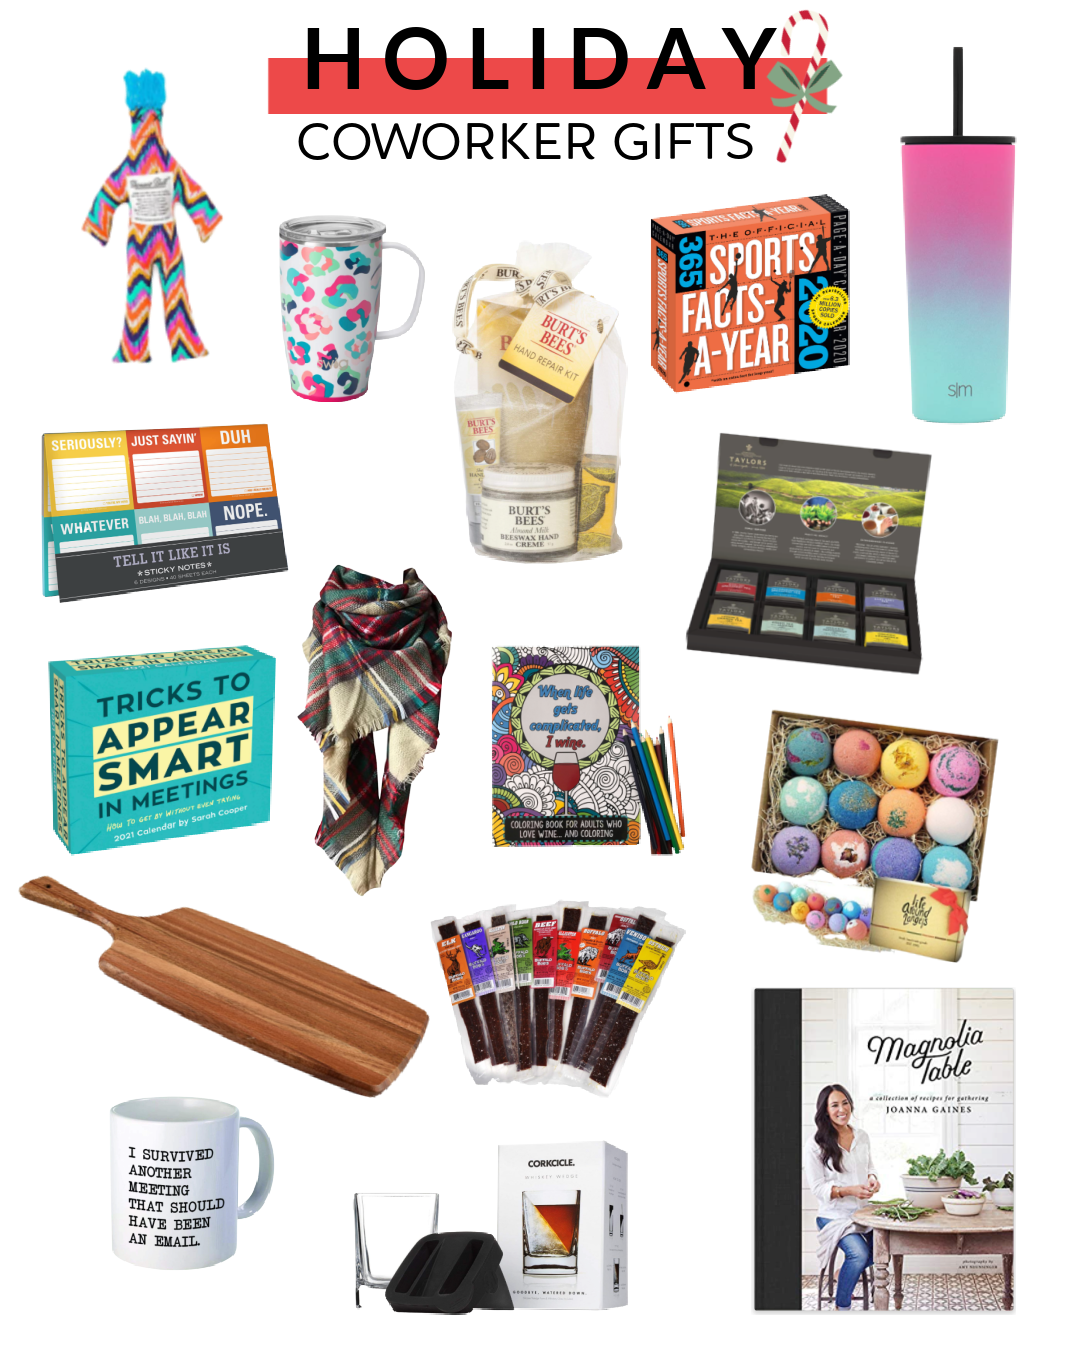 https://the-sister-studio.com/wp-content/uploads/2020/11/Coworker-Gift-Guide.png